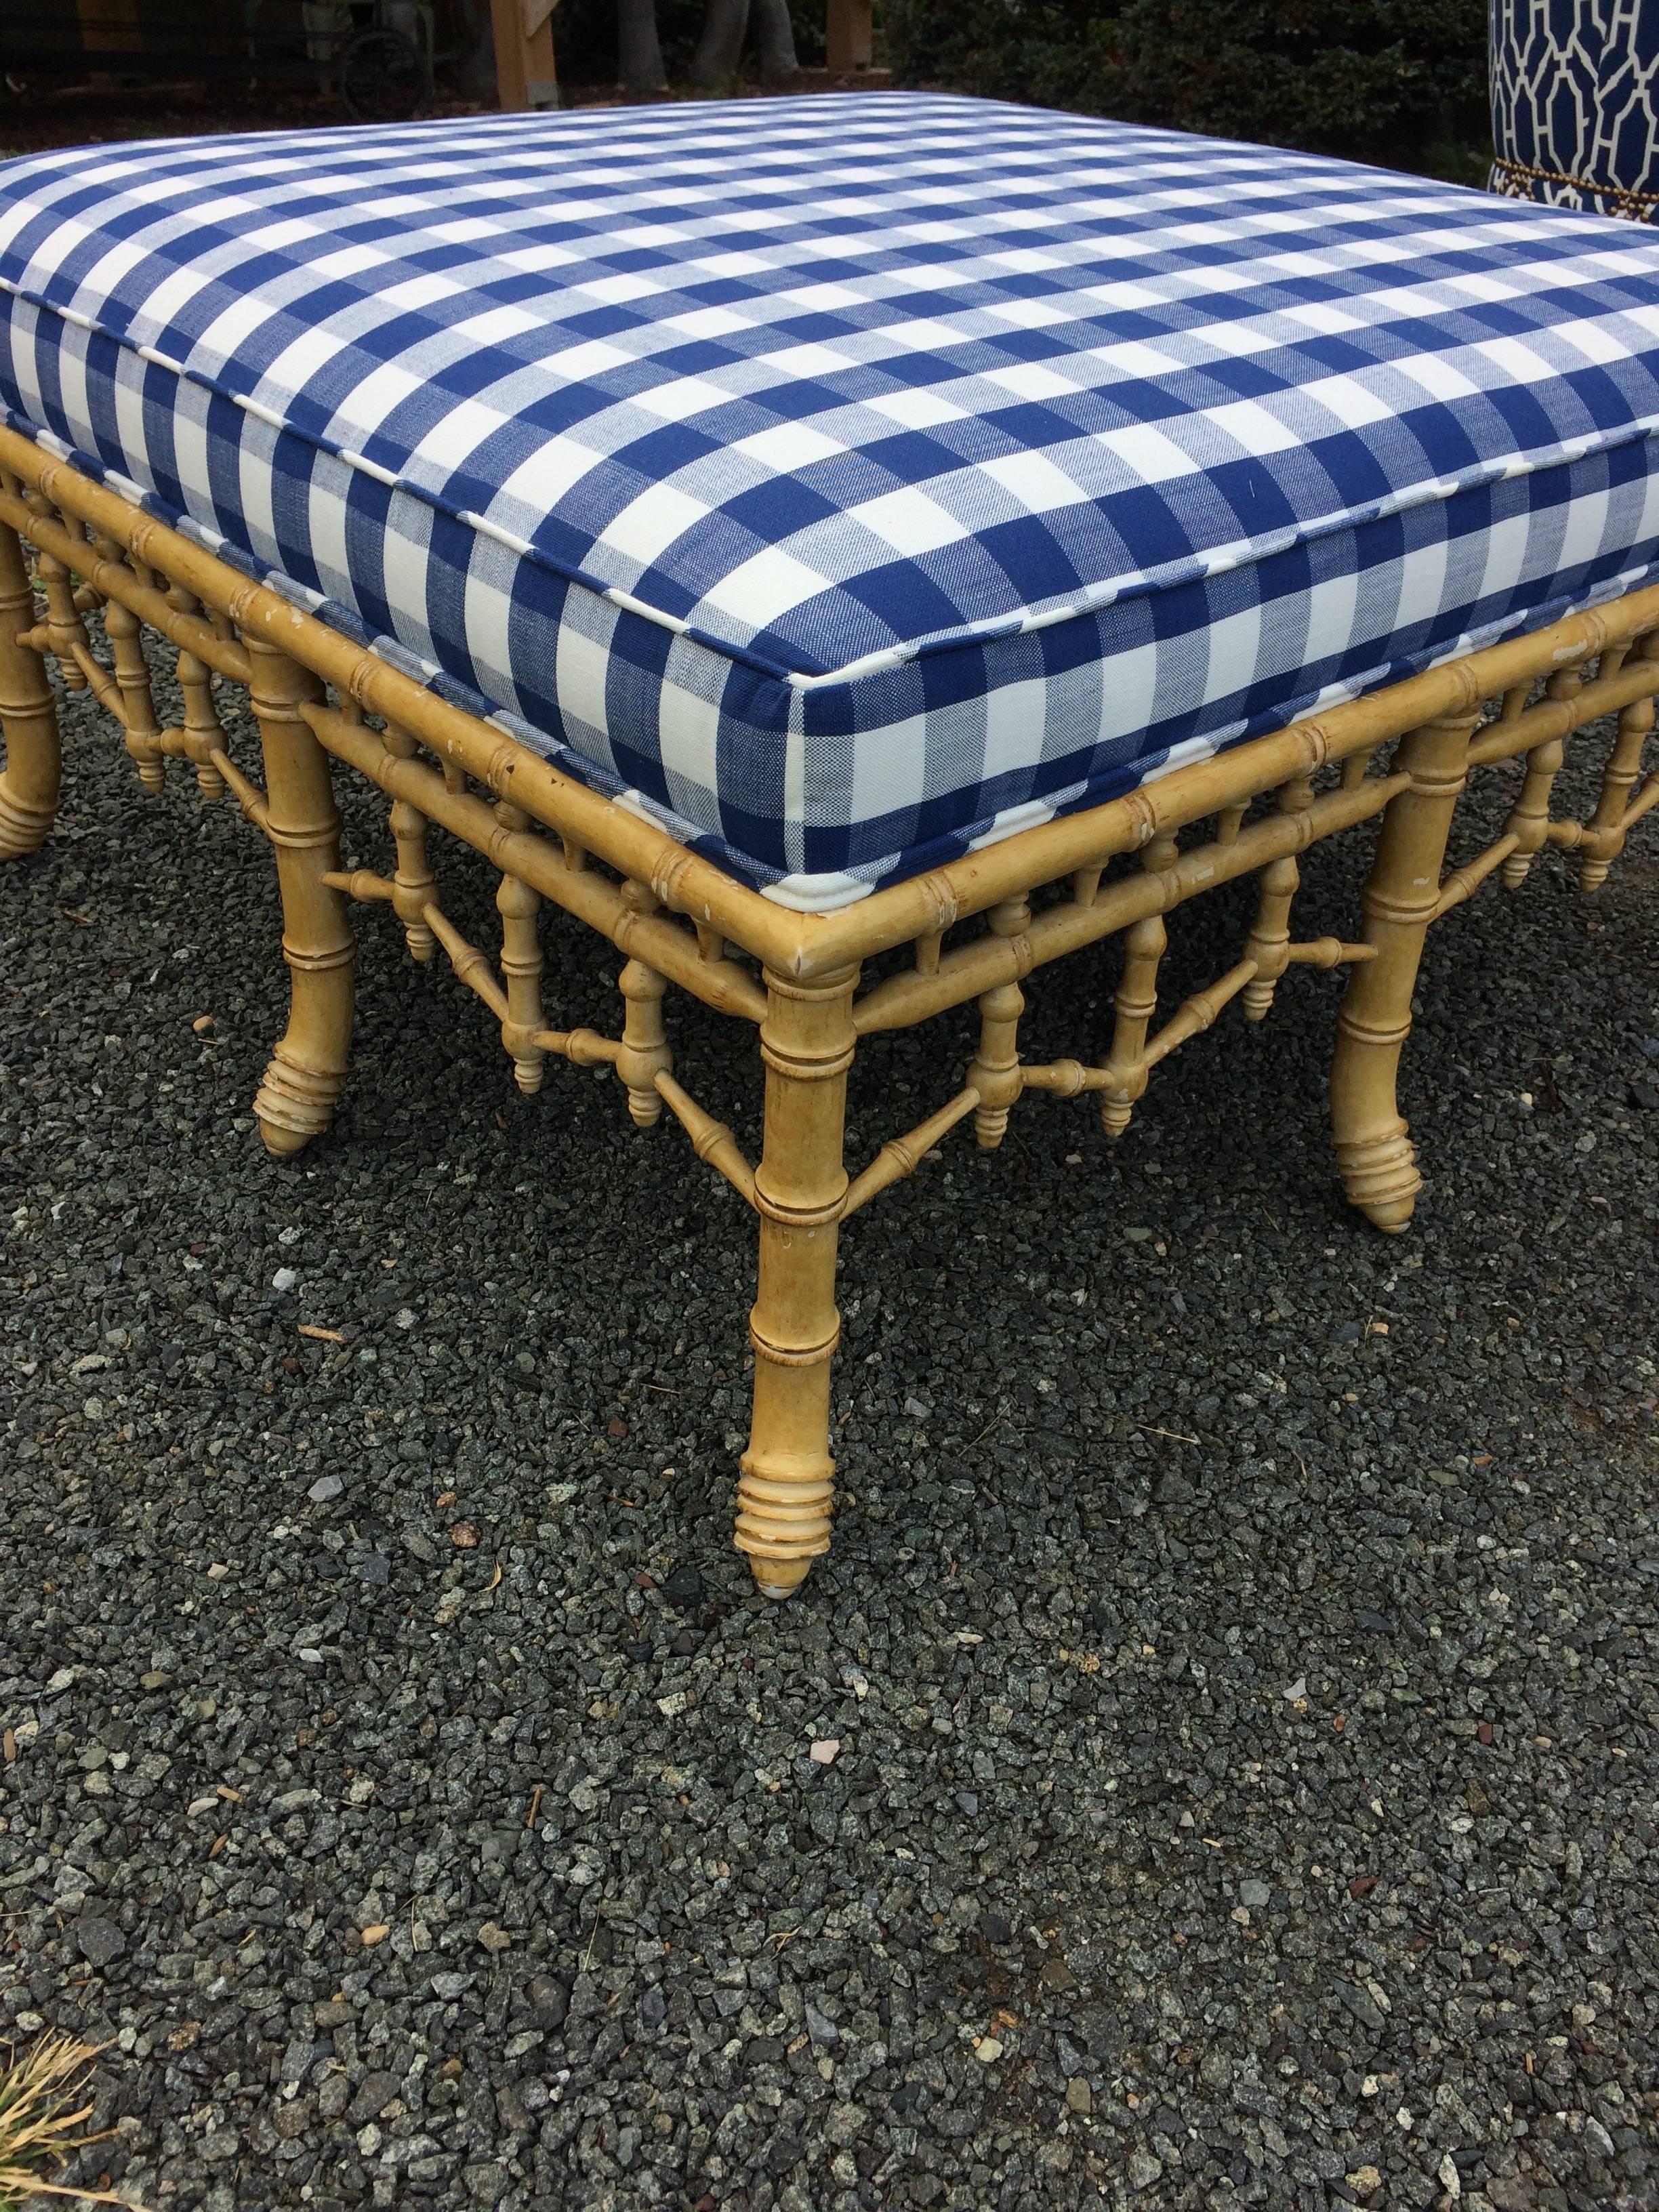 Stylish very large square ottoman having a wonderful faux bamboo base, newly upholstered in a zippy blue and white Gingham fabric.